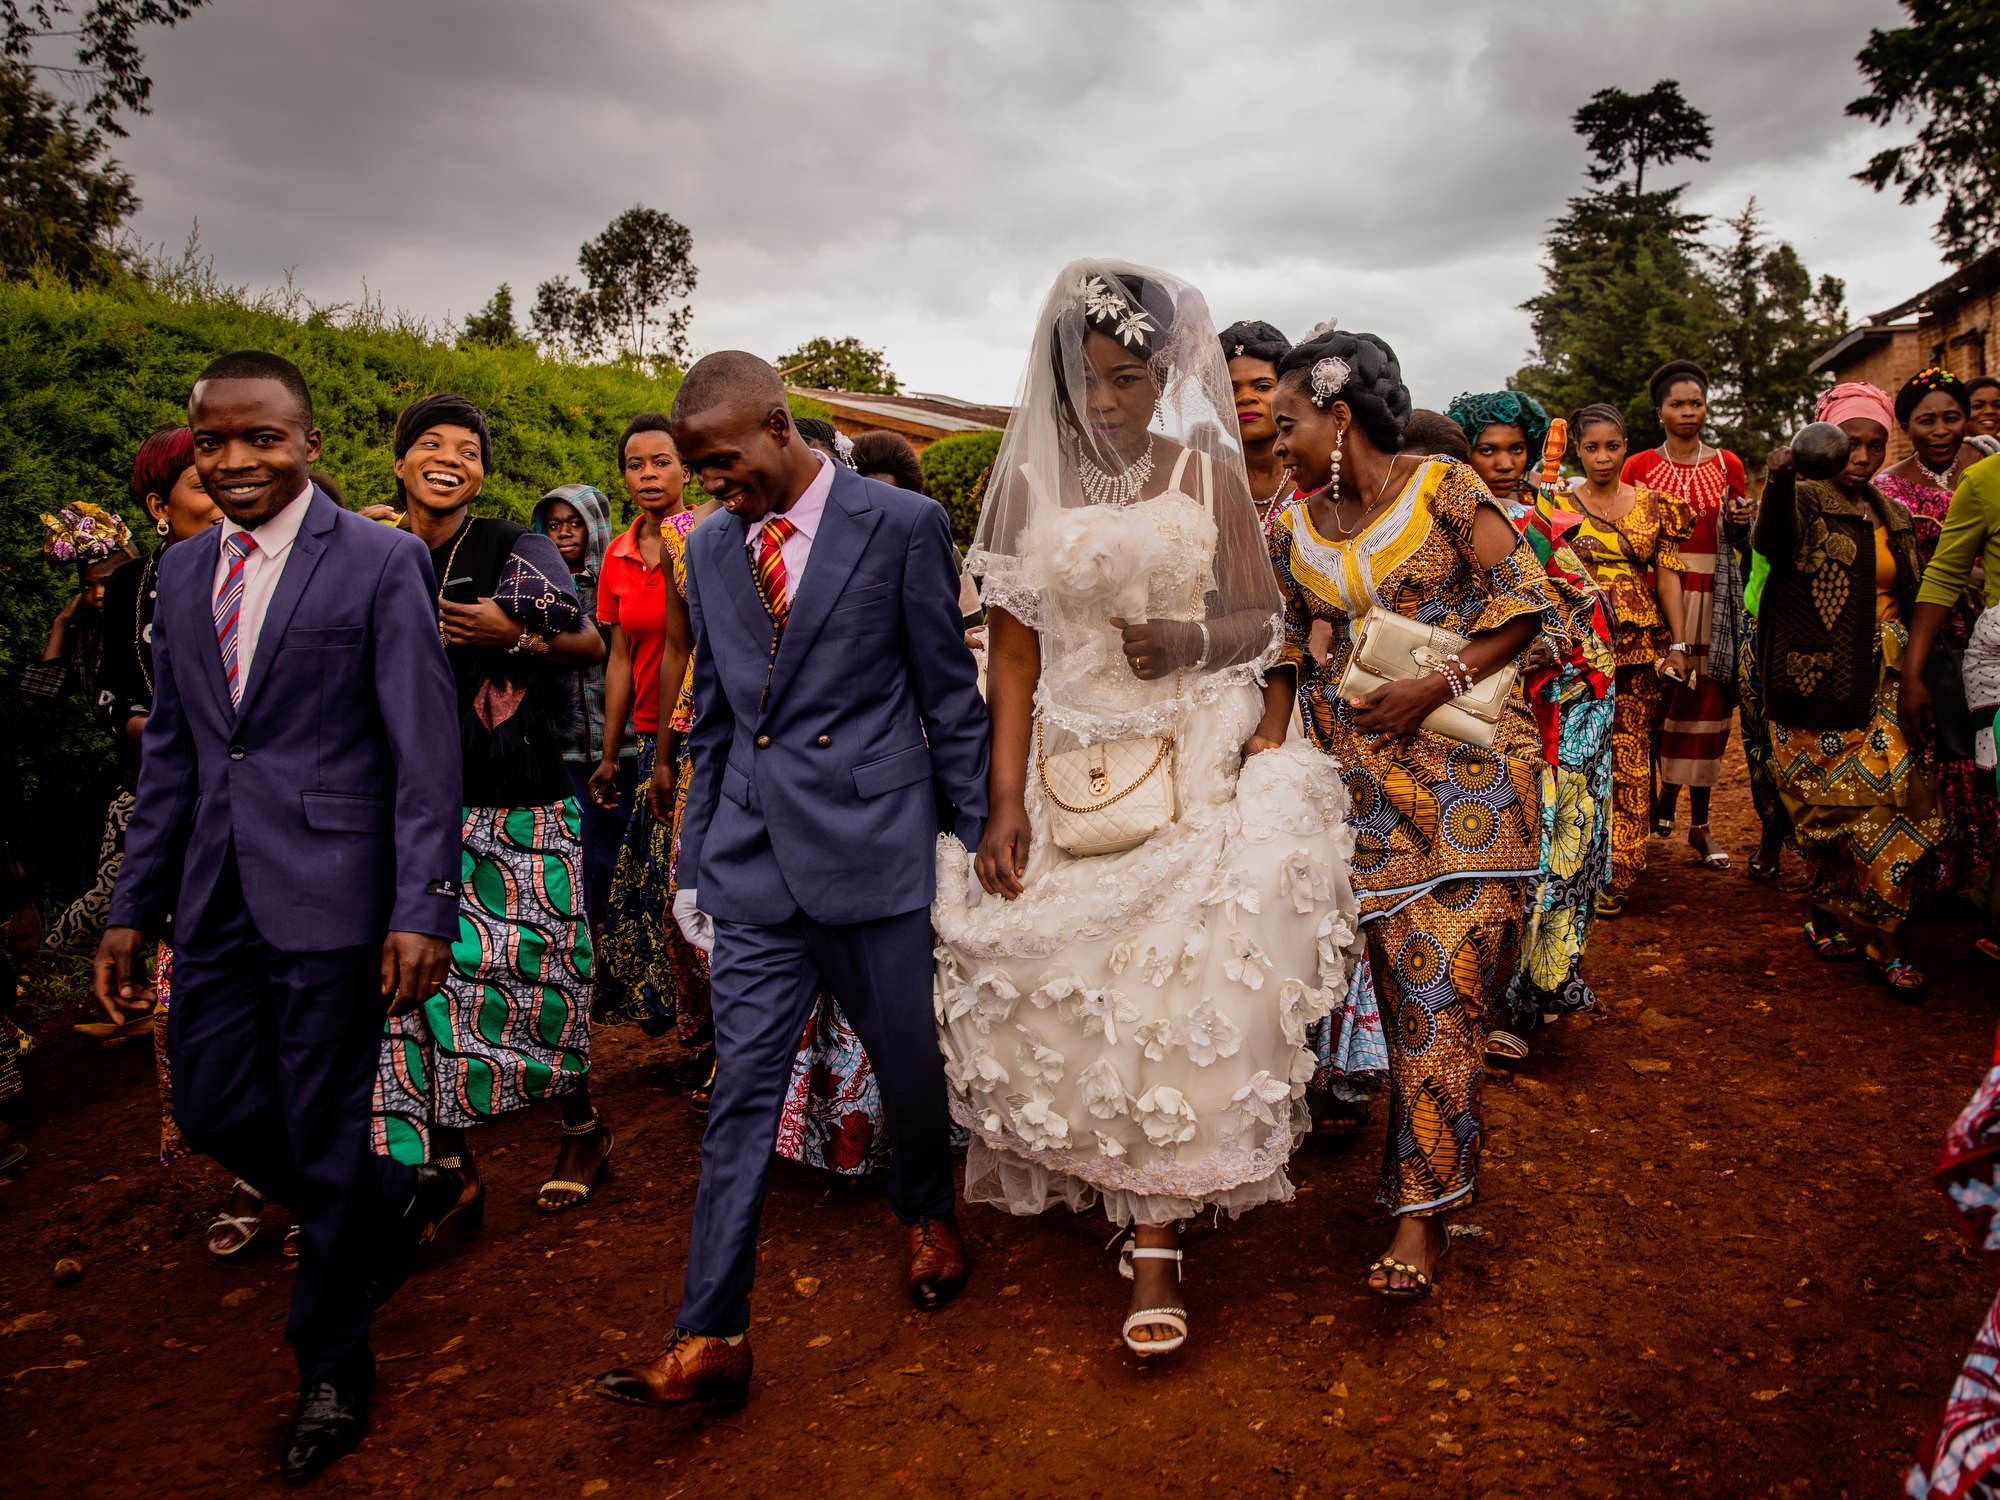  A wedding procession in the hills of Kaniola, South Kivu Province.  